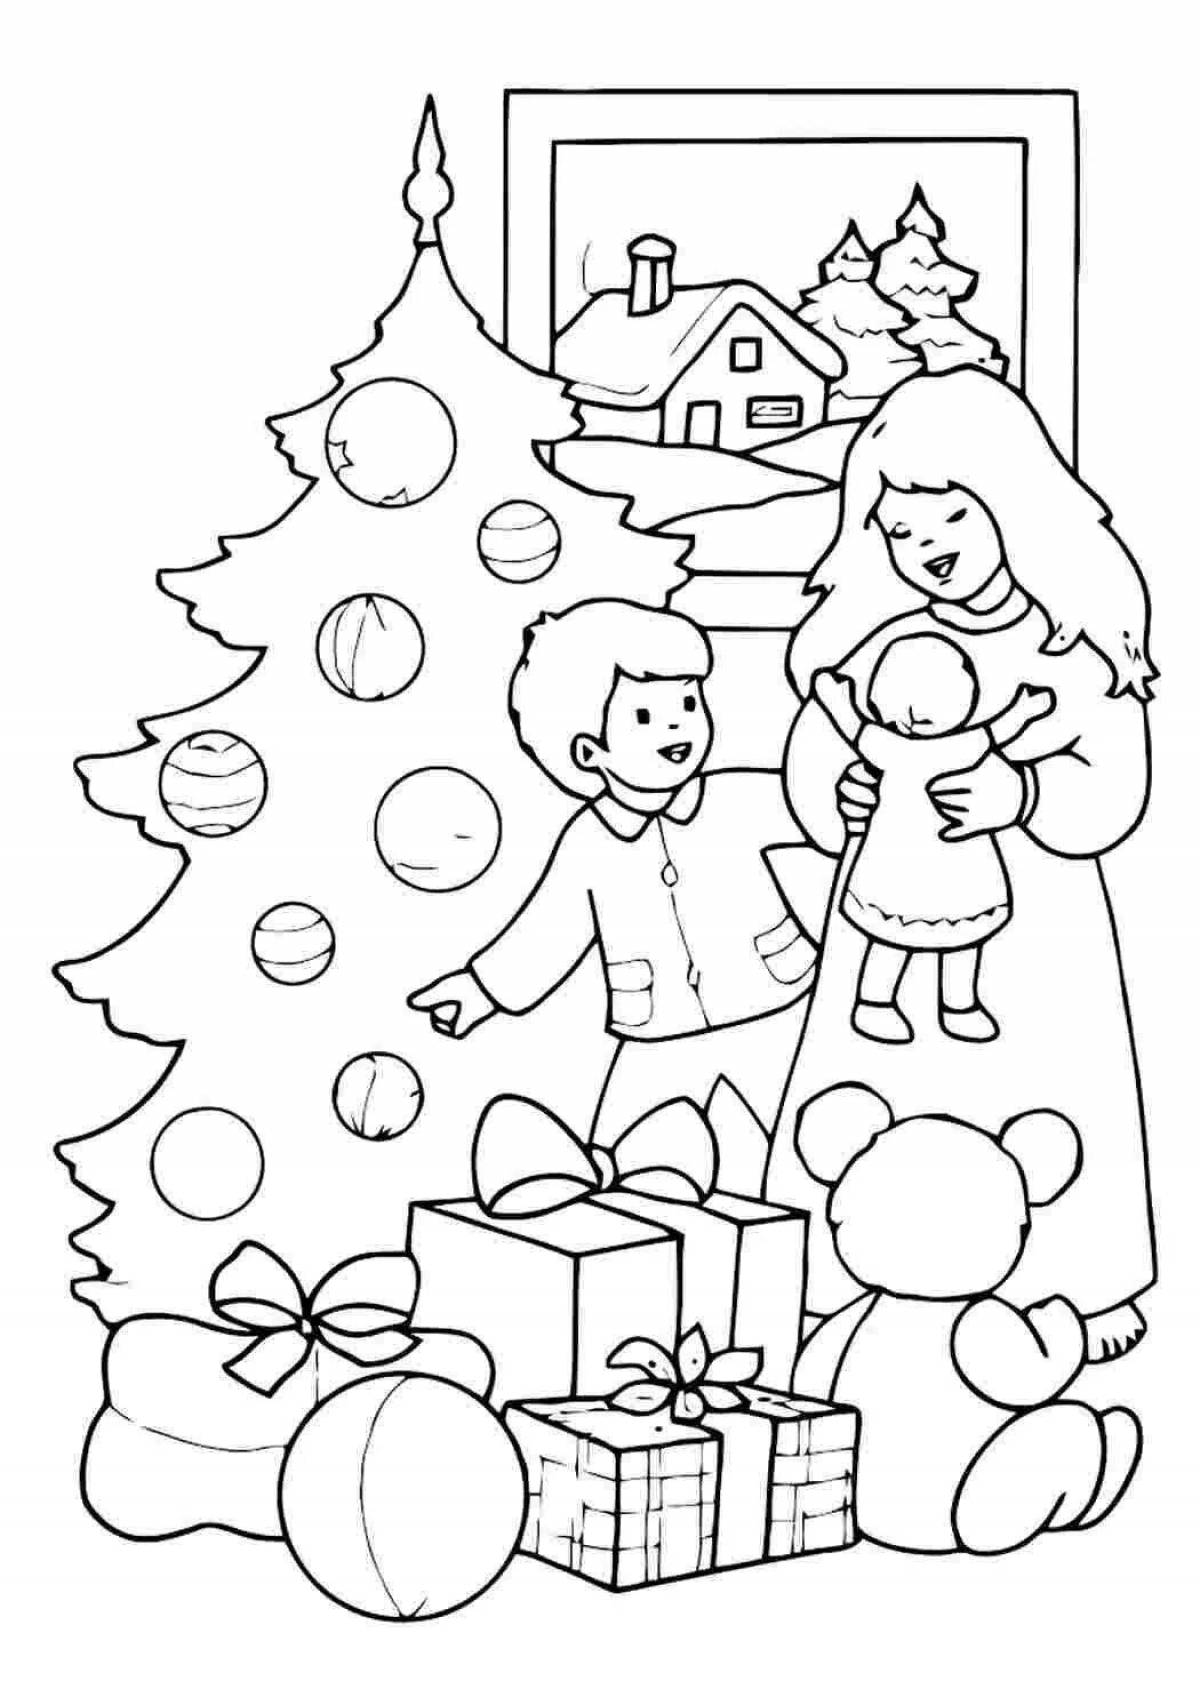 Glorious Christmas story coloring book